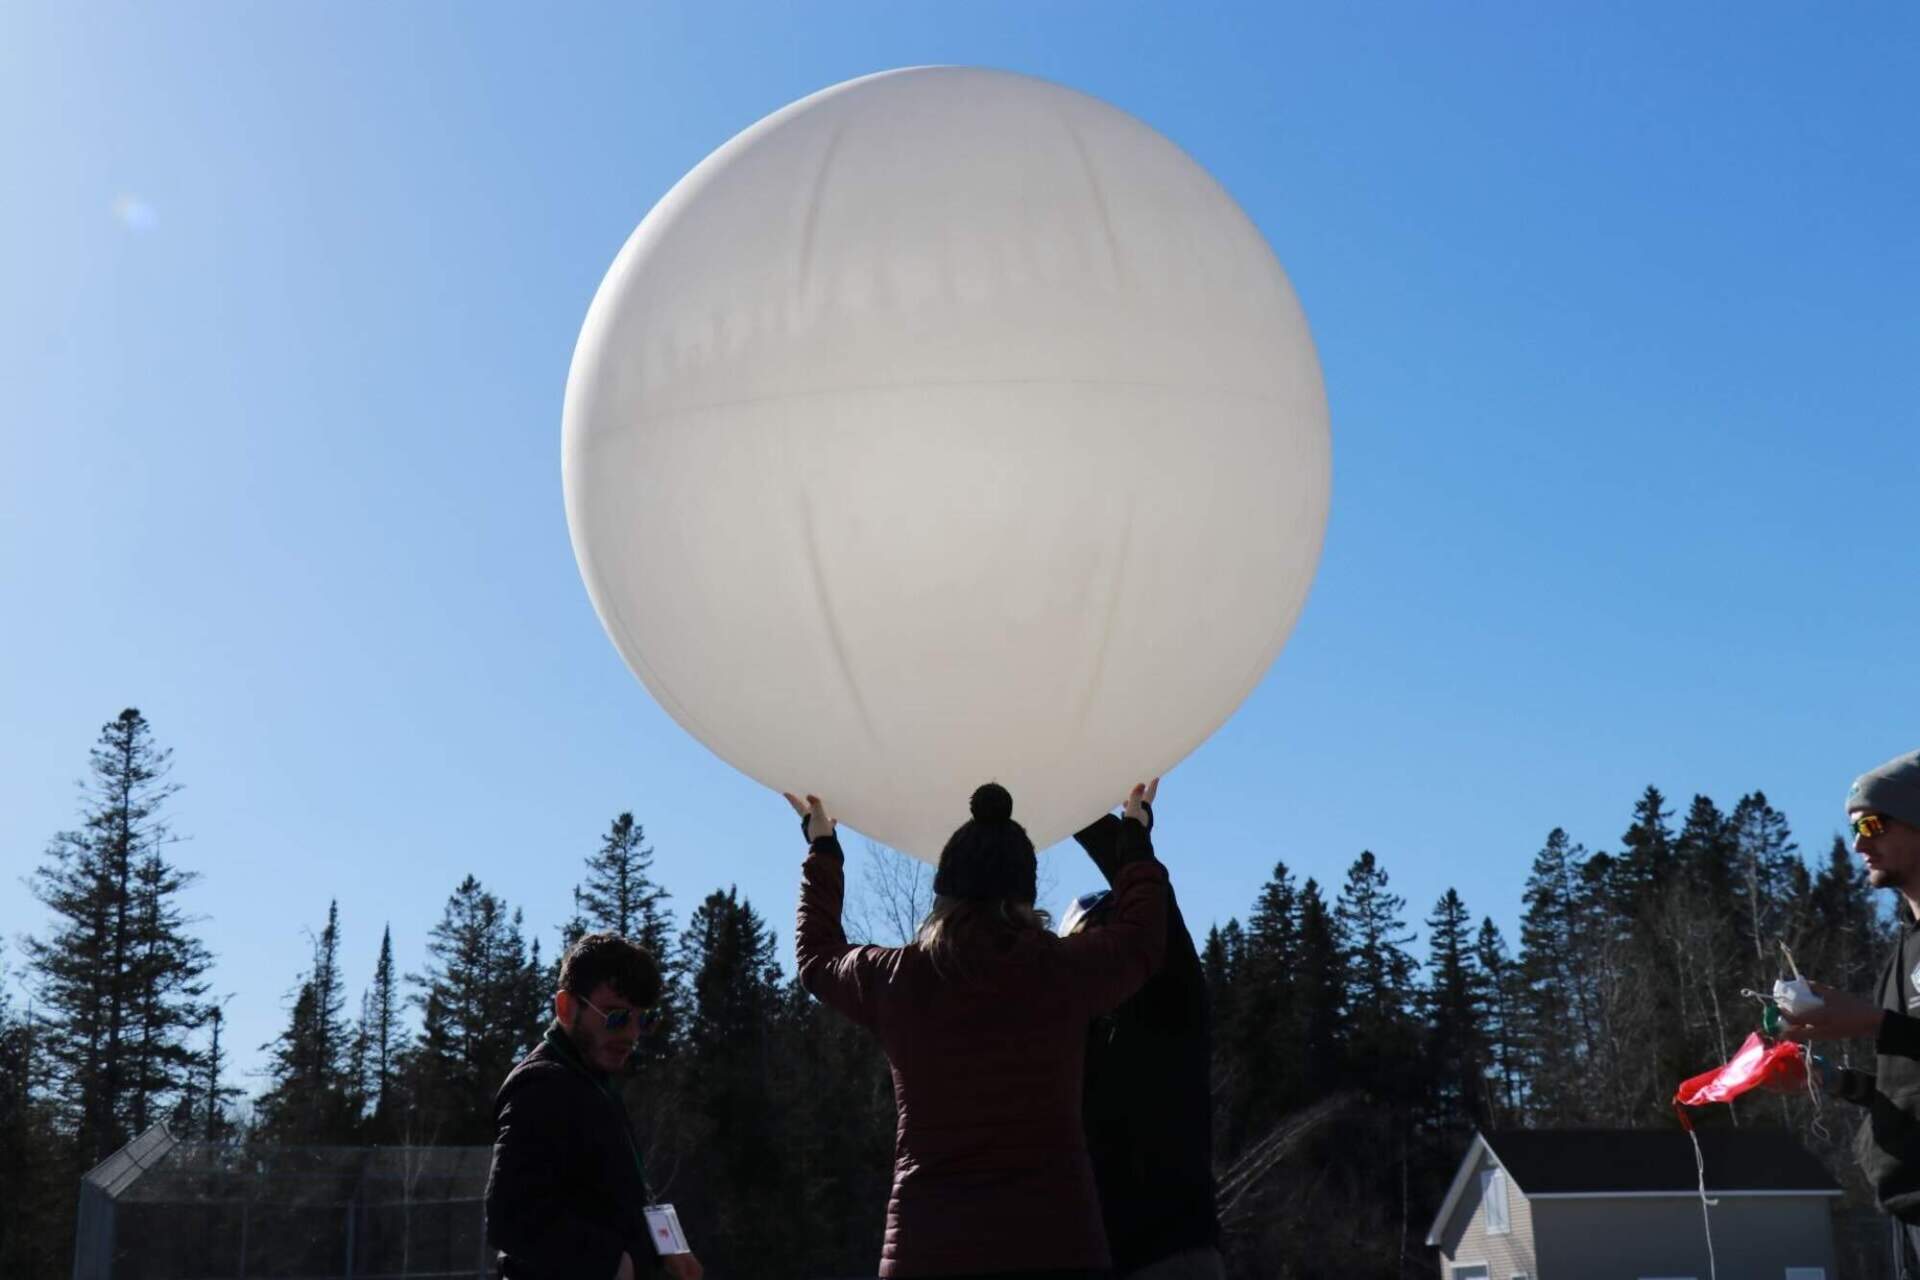 Plymouth State University students and professor on the NASA eclipse ballooning team prepare a weather balloon for launch in Pittsburg, New Hampshire. (Zoey Knox/NHPR)